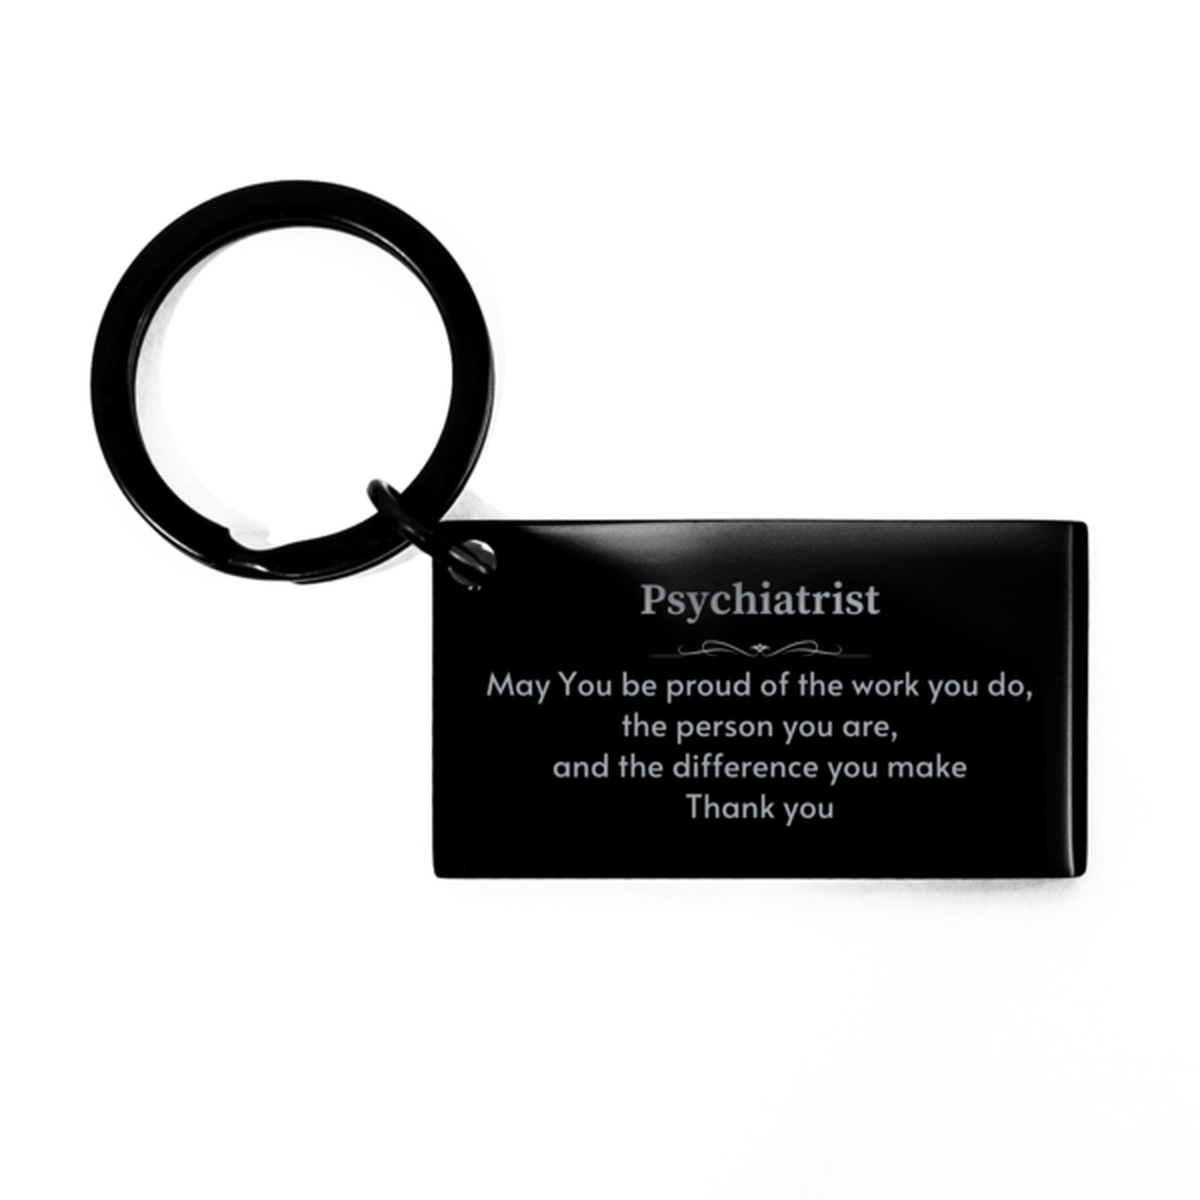 Heartwarming Keychain Retirement Coworkers Gifts for Psychiatrist, Sonographer May You be proud of the work you do, the person you are Gifts for Boss Men Women Friends